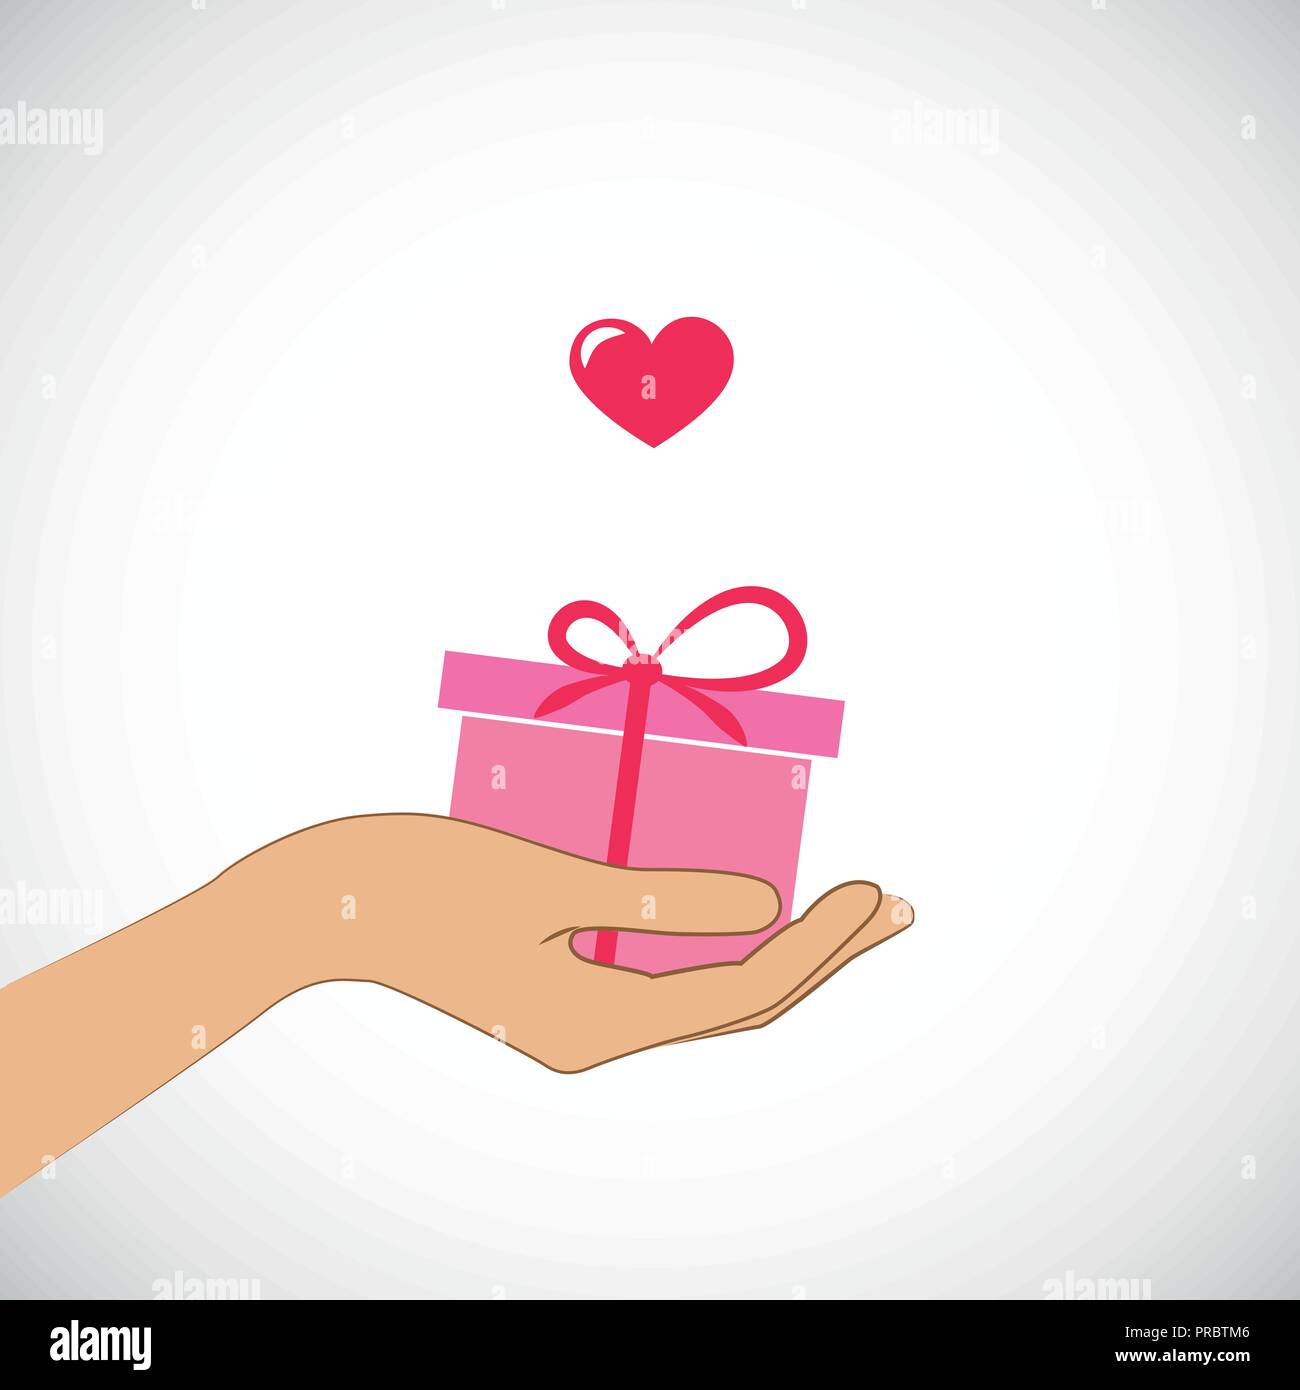 pink gift in hand idea for celebrations with love vector illustration EPS10 Stock Vector